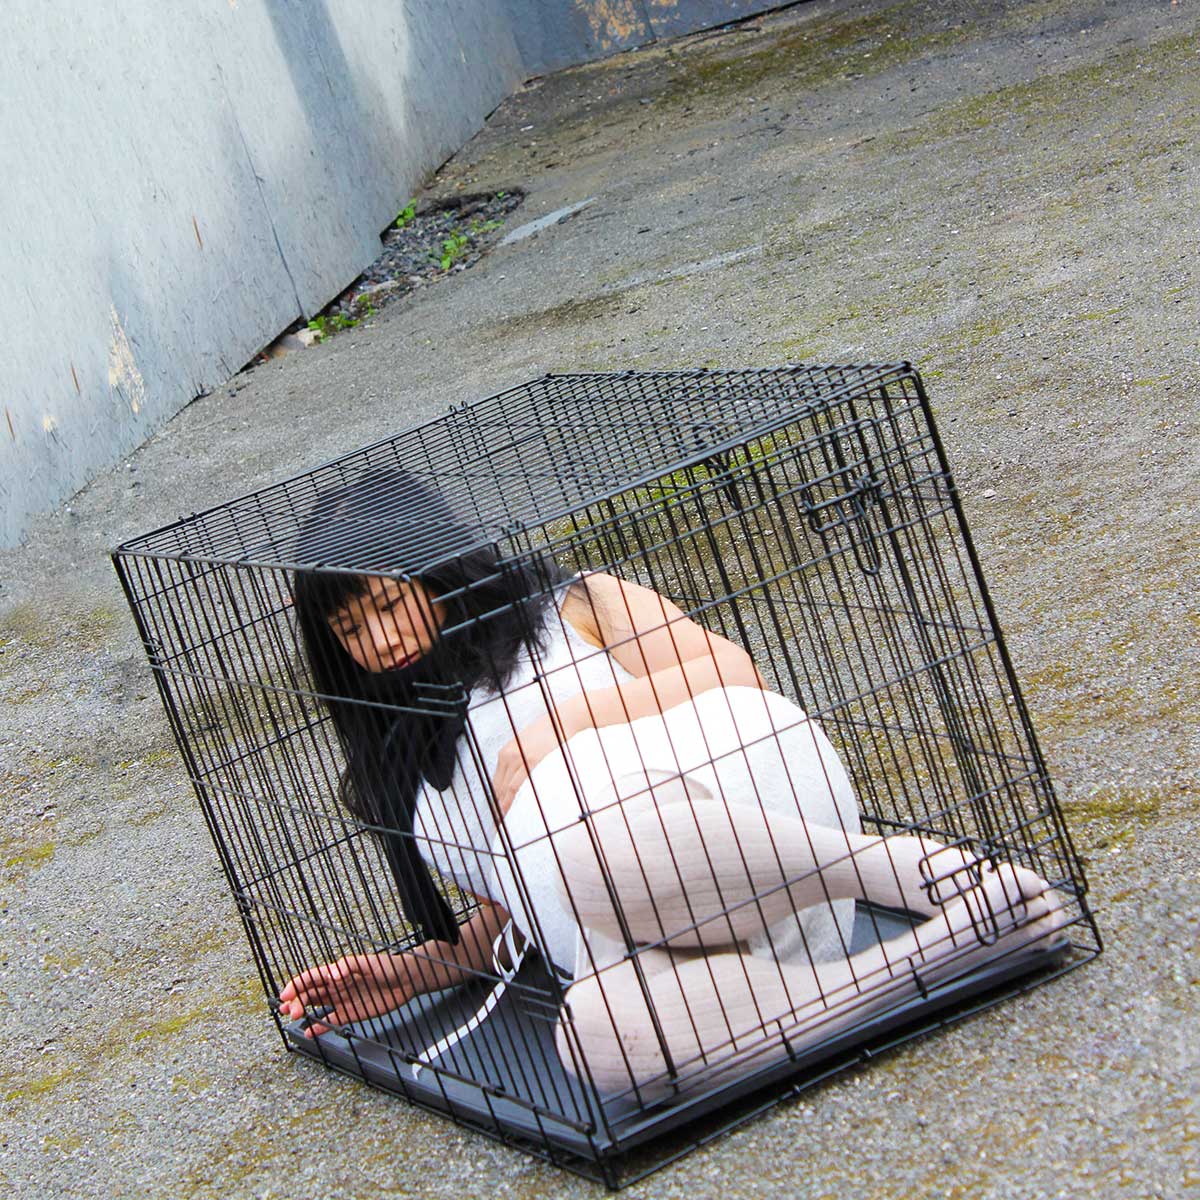 Chun Hua Catherine Dong was pregnant and she locked herself in a dog cage for six hours in a public space in the city of Dublin in 2014